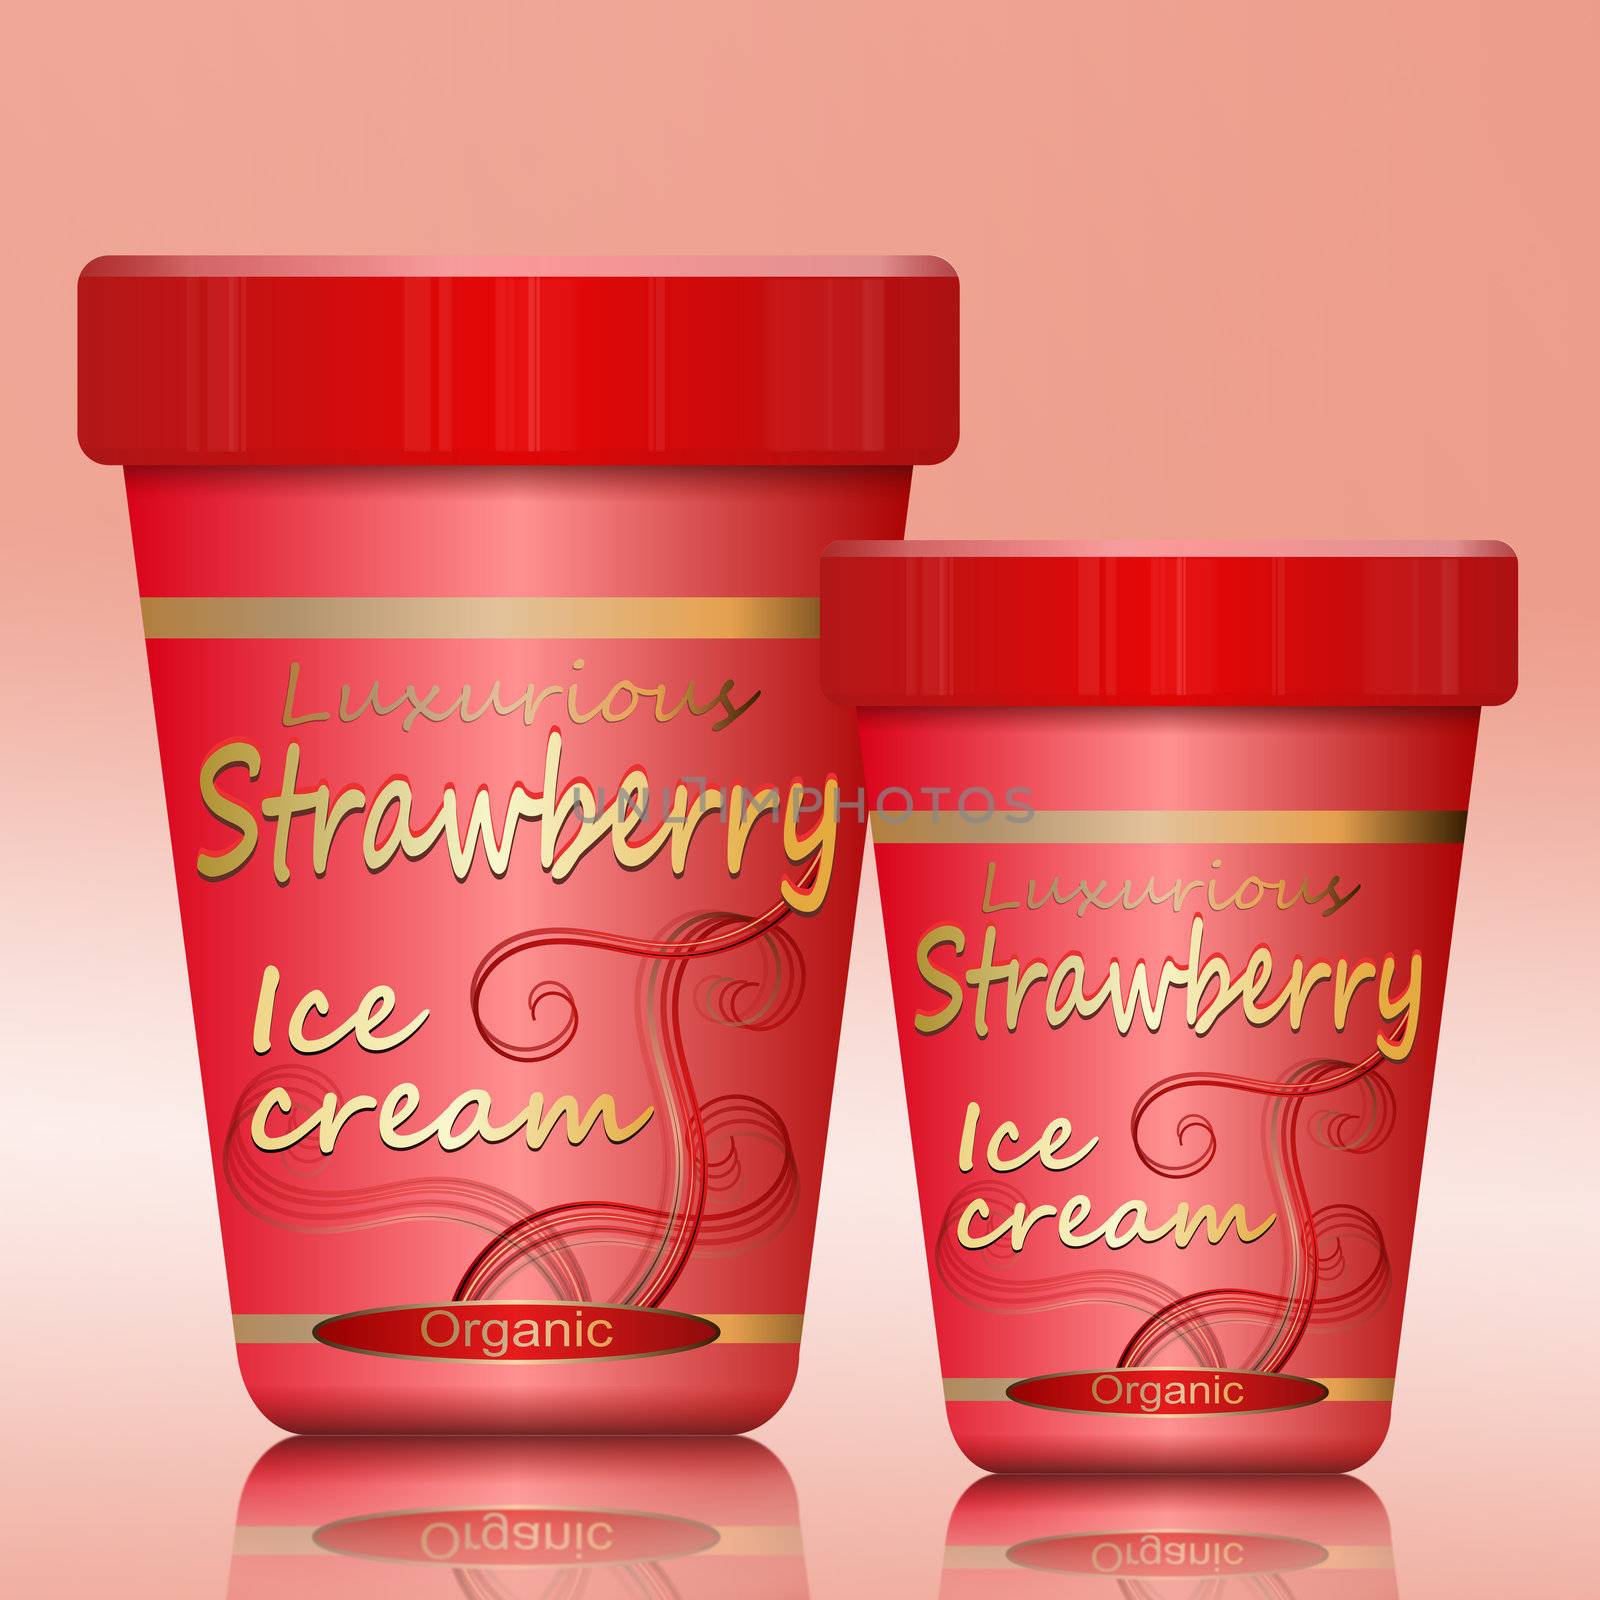 Illustration depicting two strawberry ice cream containers arranged over pink.